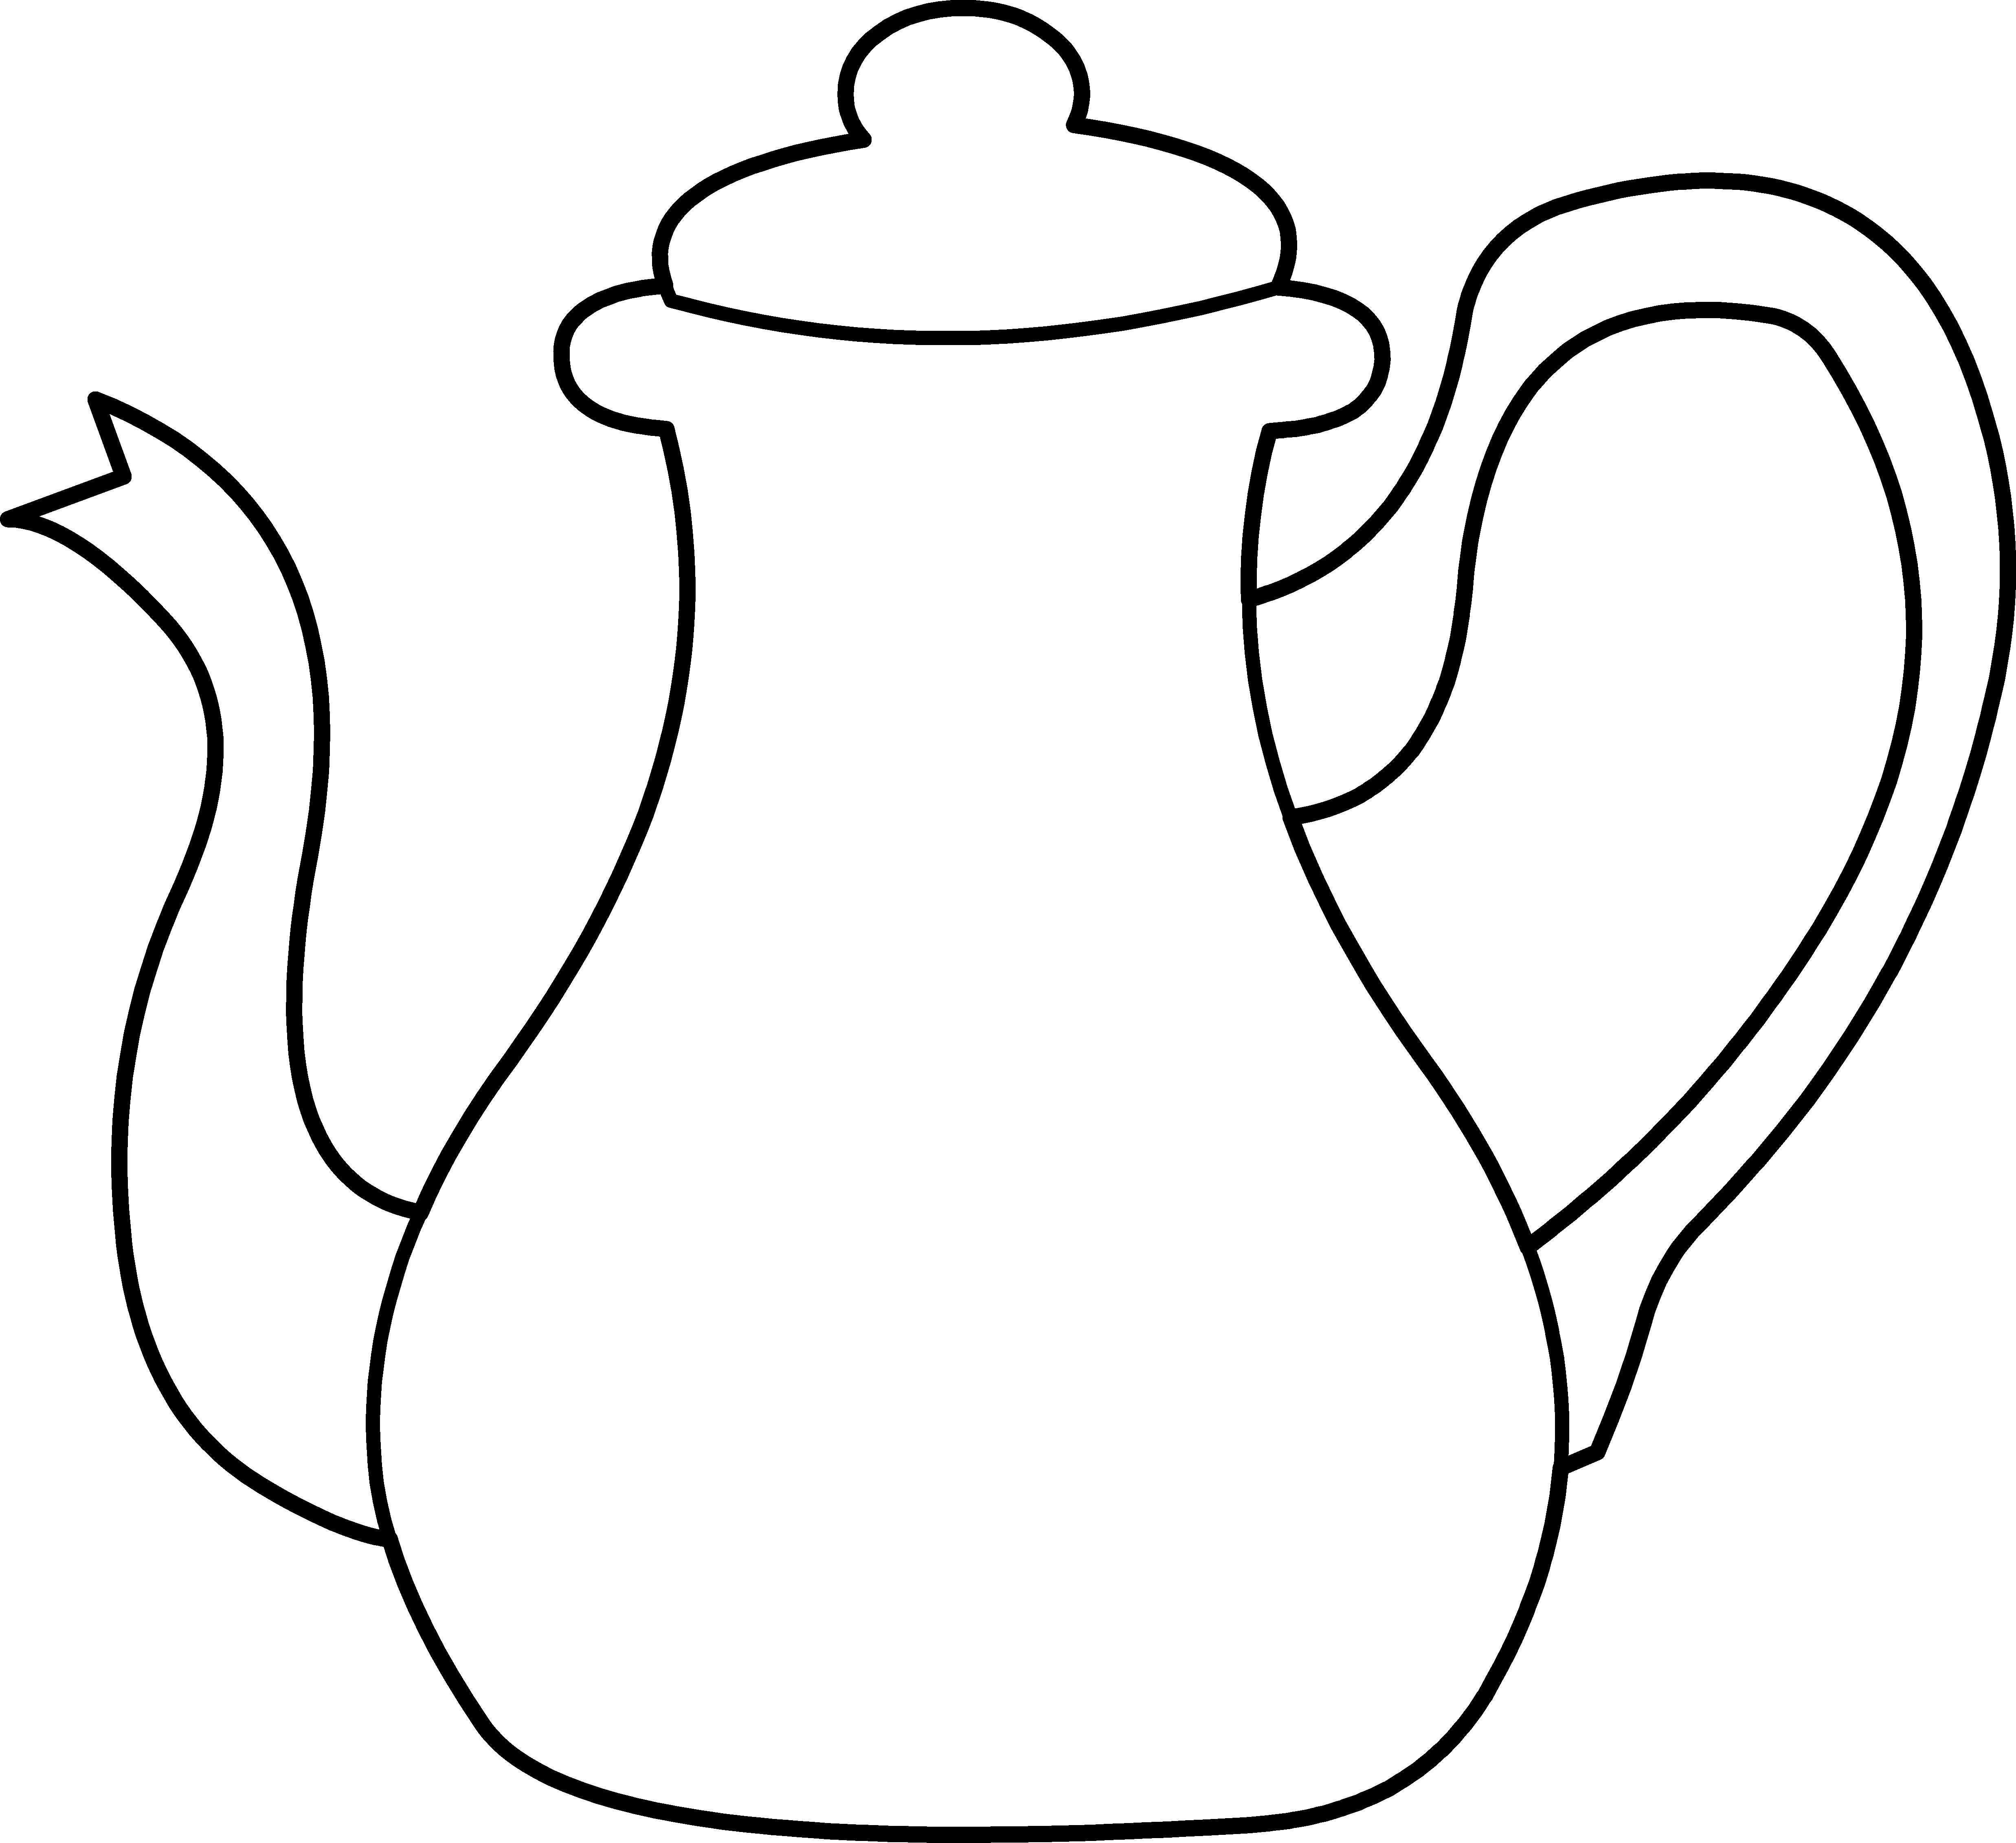 Free Teapot Outline, Download Free Teapot Outline png images, Free